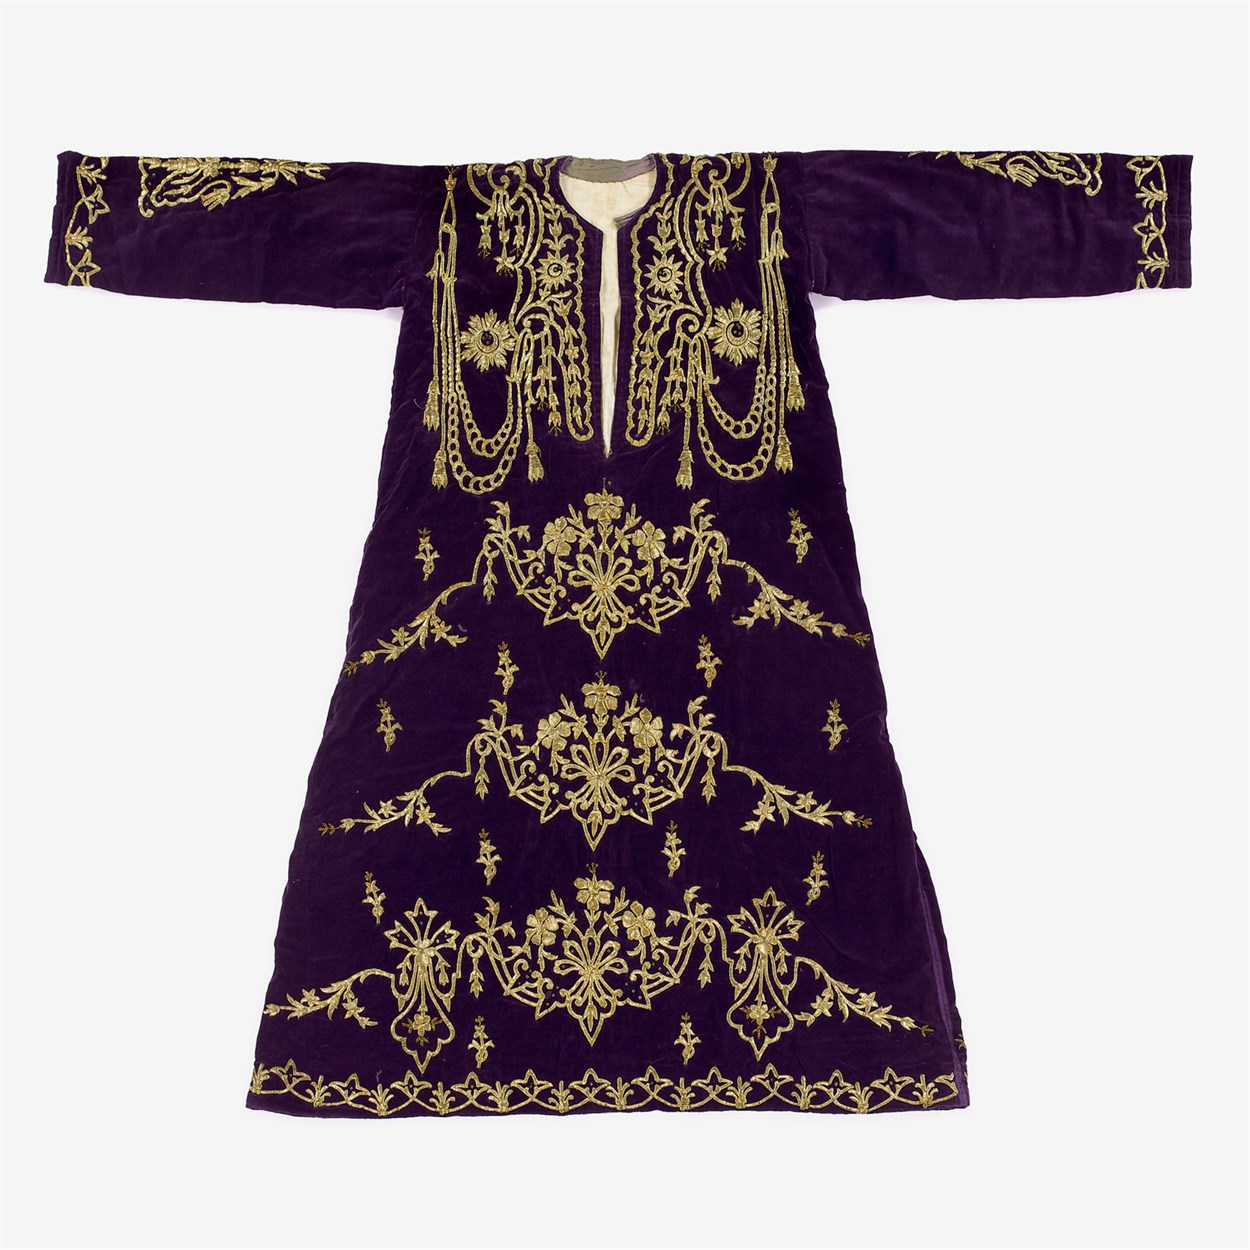 Lot 83 - Turkish embroidered robe